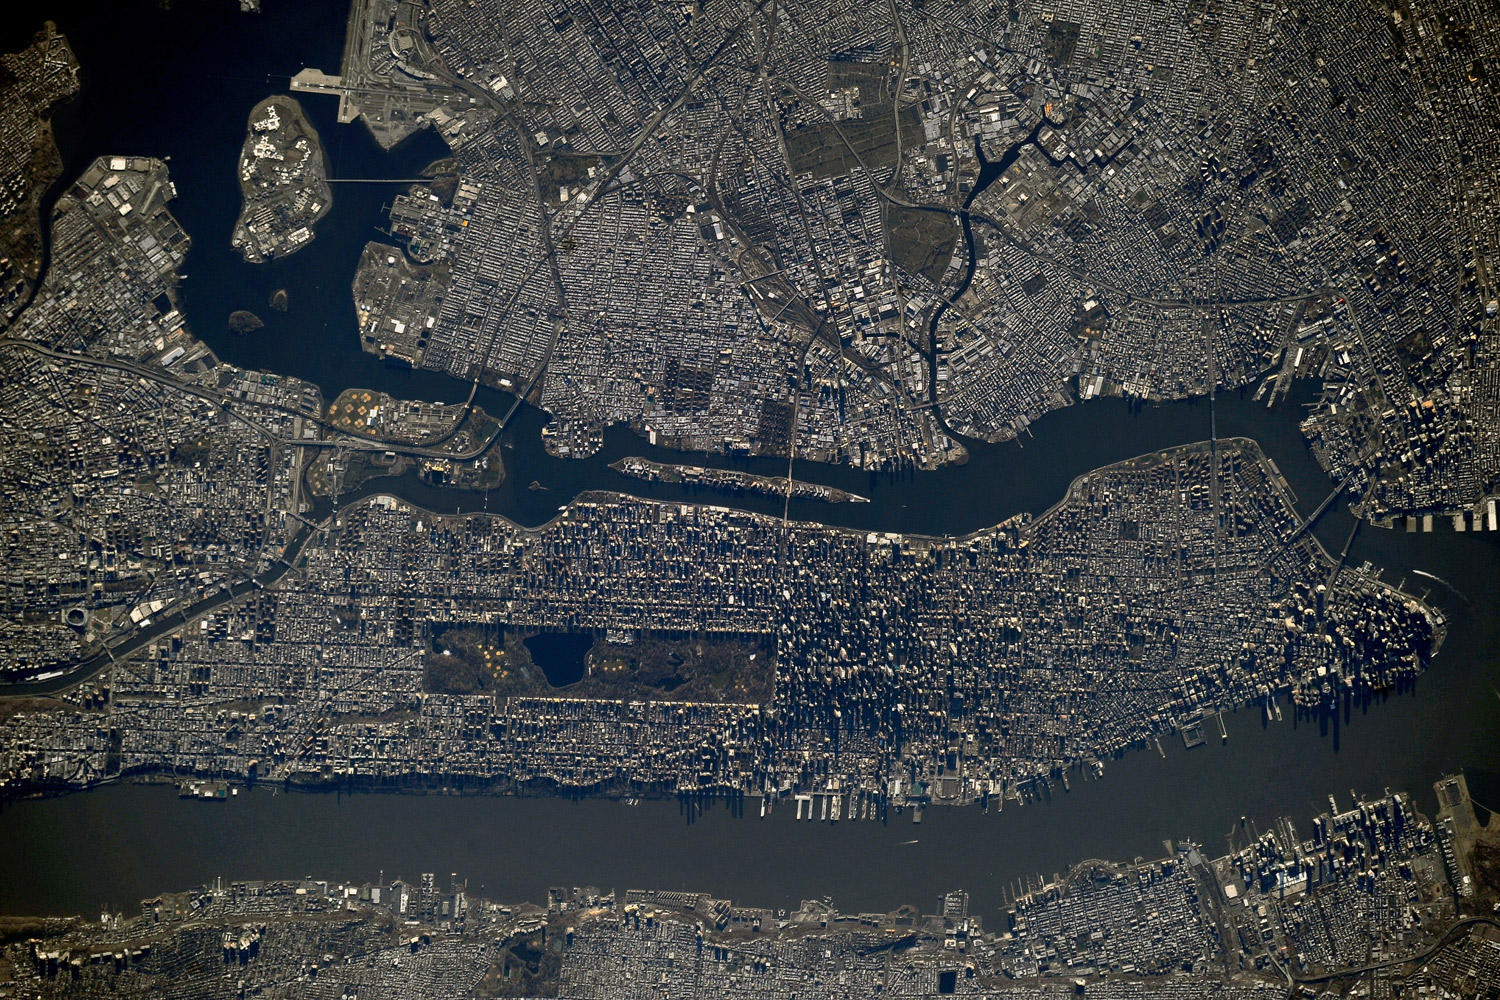 New York City, as seen from the International Space Station.